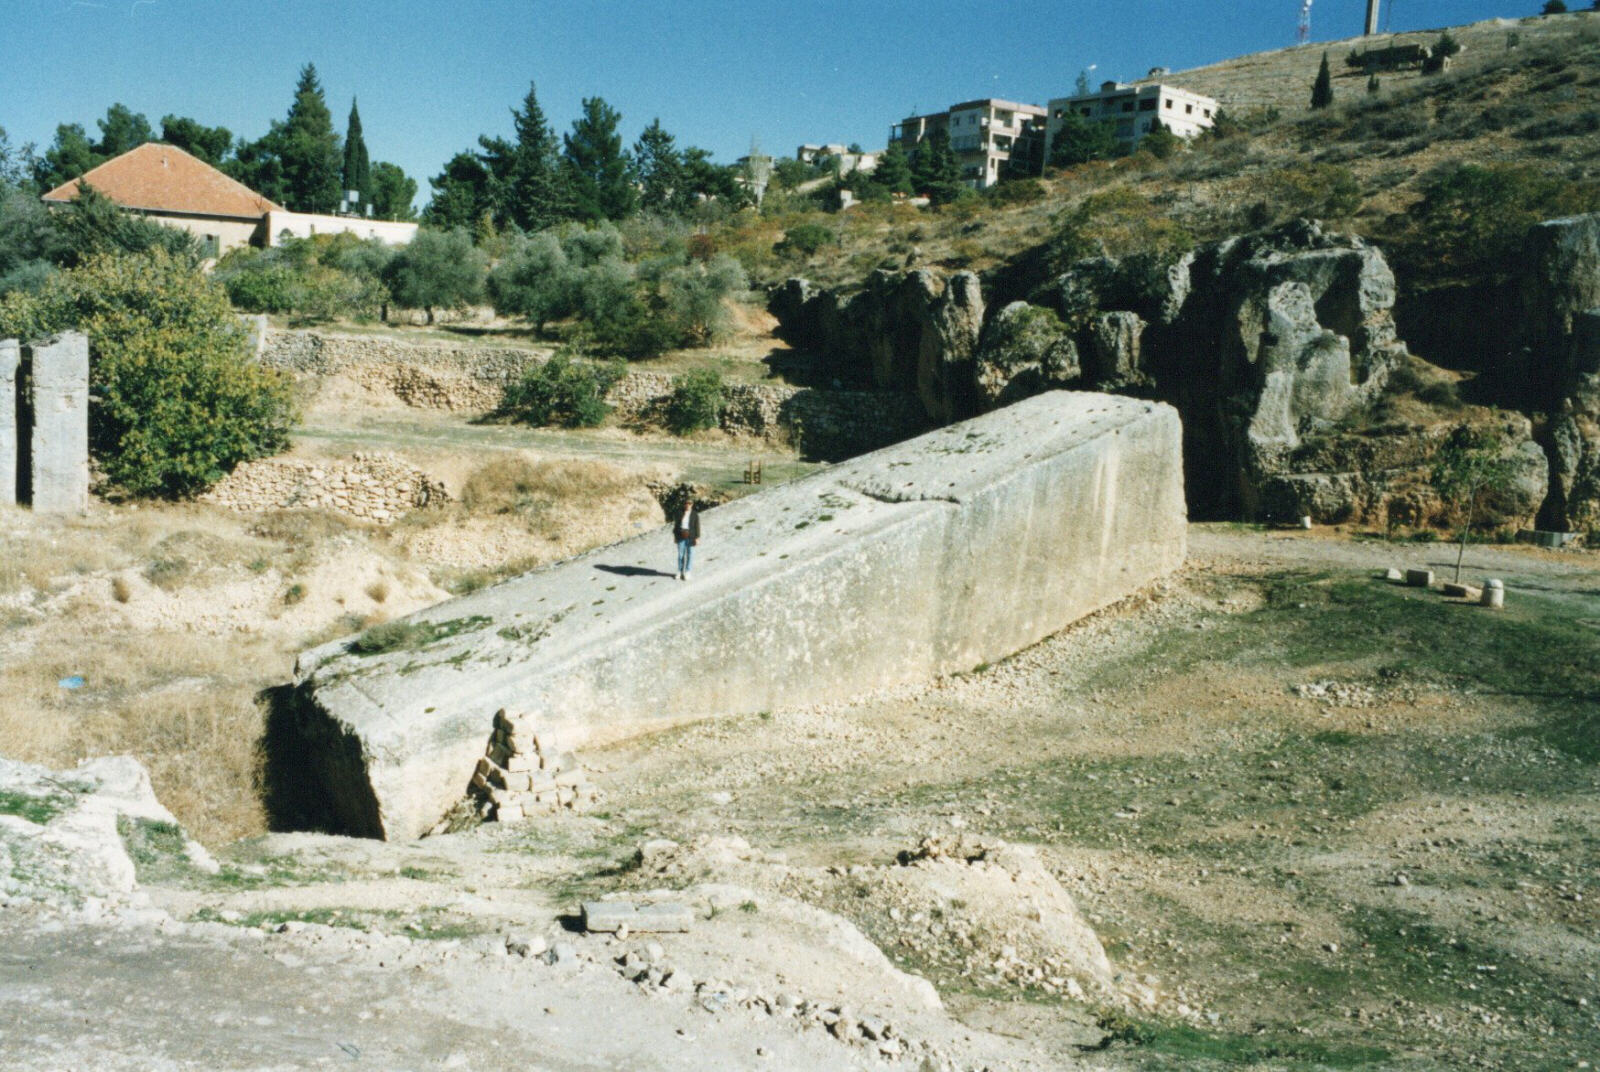 The biggest stone at the quarry near Baalbeck, Lebanon